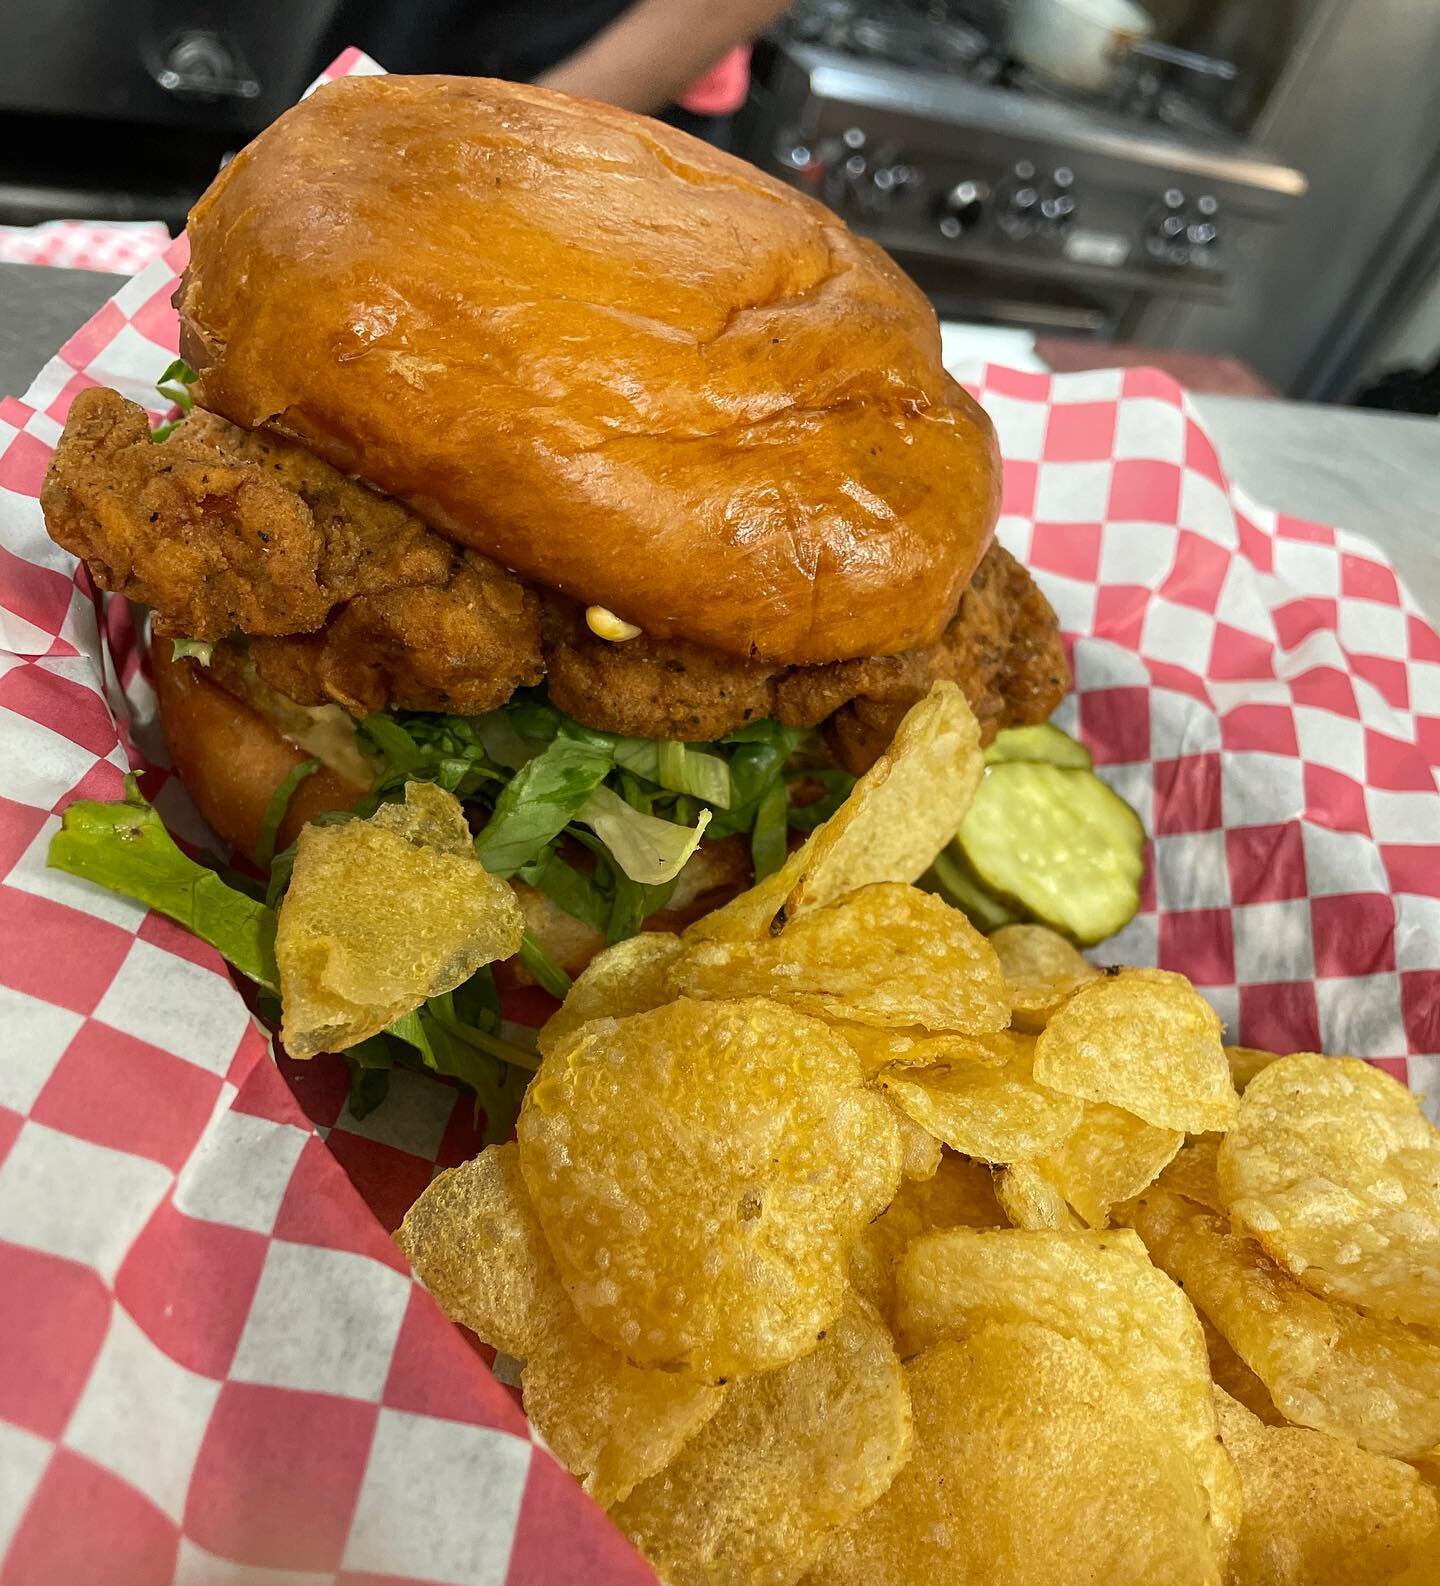 Fried chicken sandwich and the mushroom melt!! And did you know @insightbrewing Night Shift is our rotating beer right now?? #goodfoodnobull #burger #friedchicken #beer #nokomislife #minneapolis